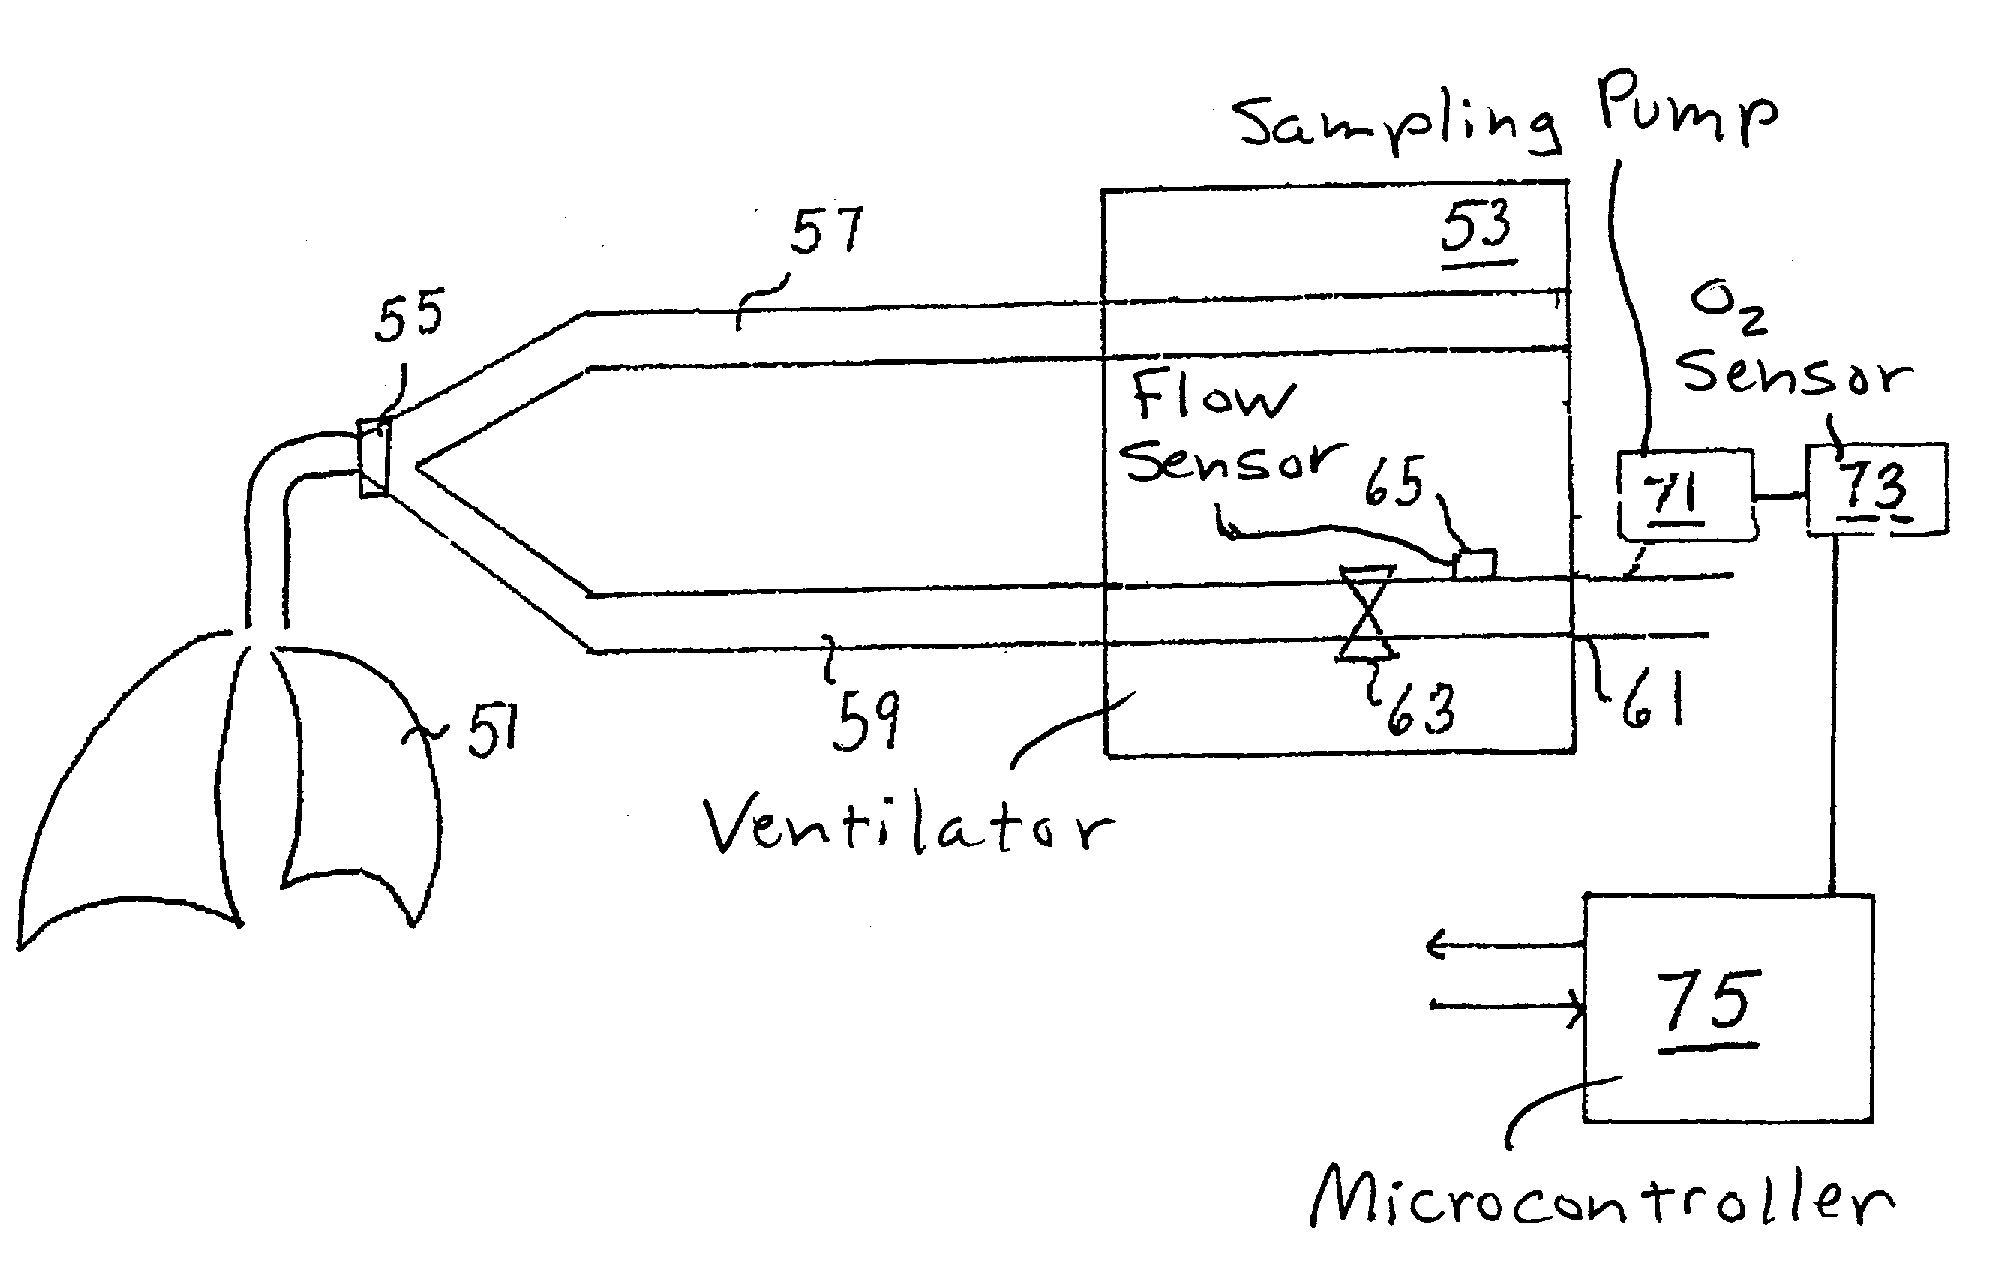 Method and Apparatus for Lung Volume Estimation